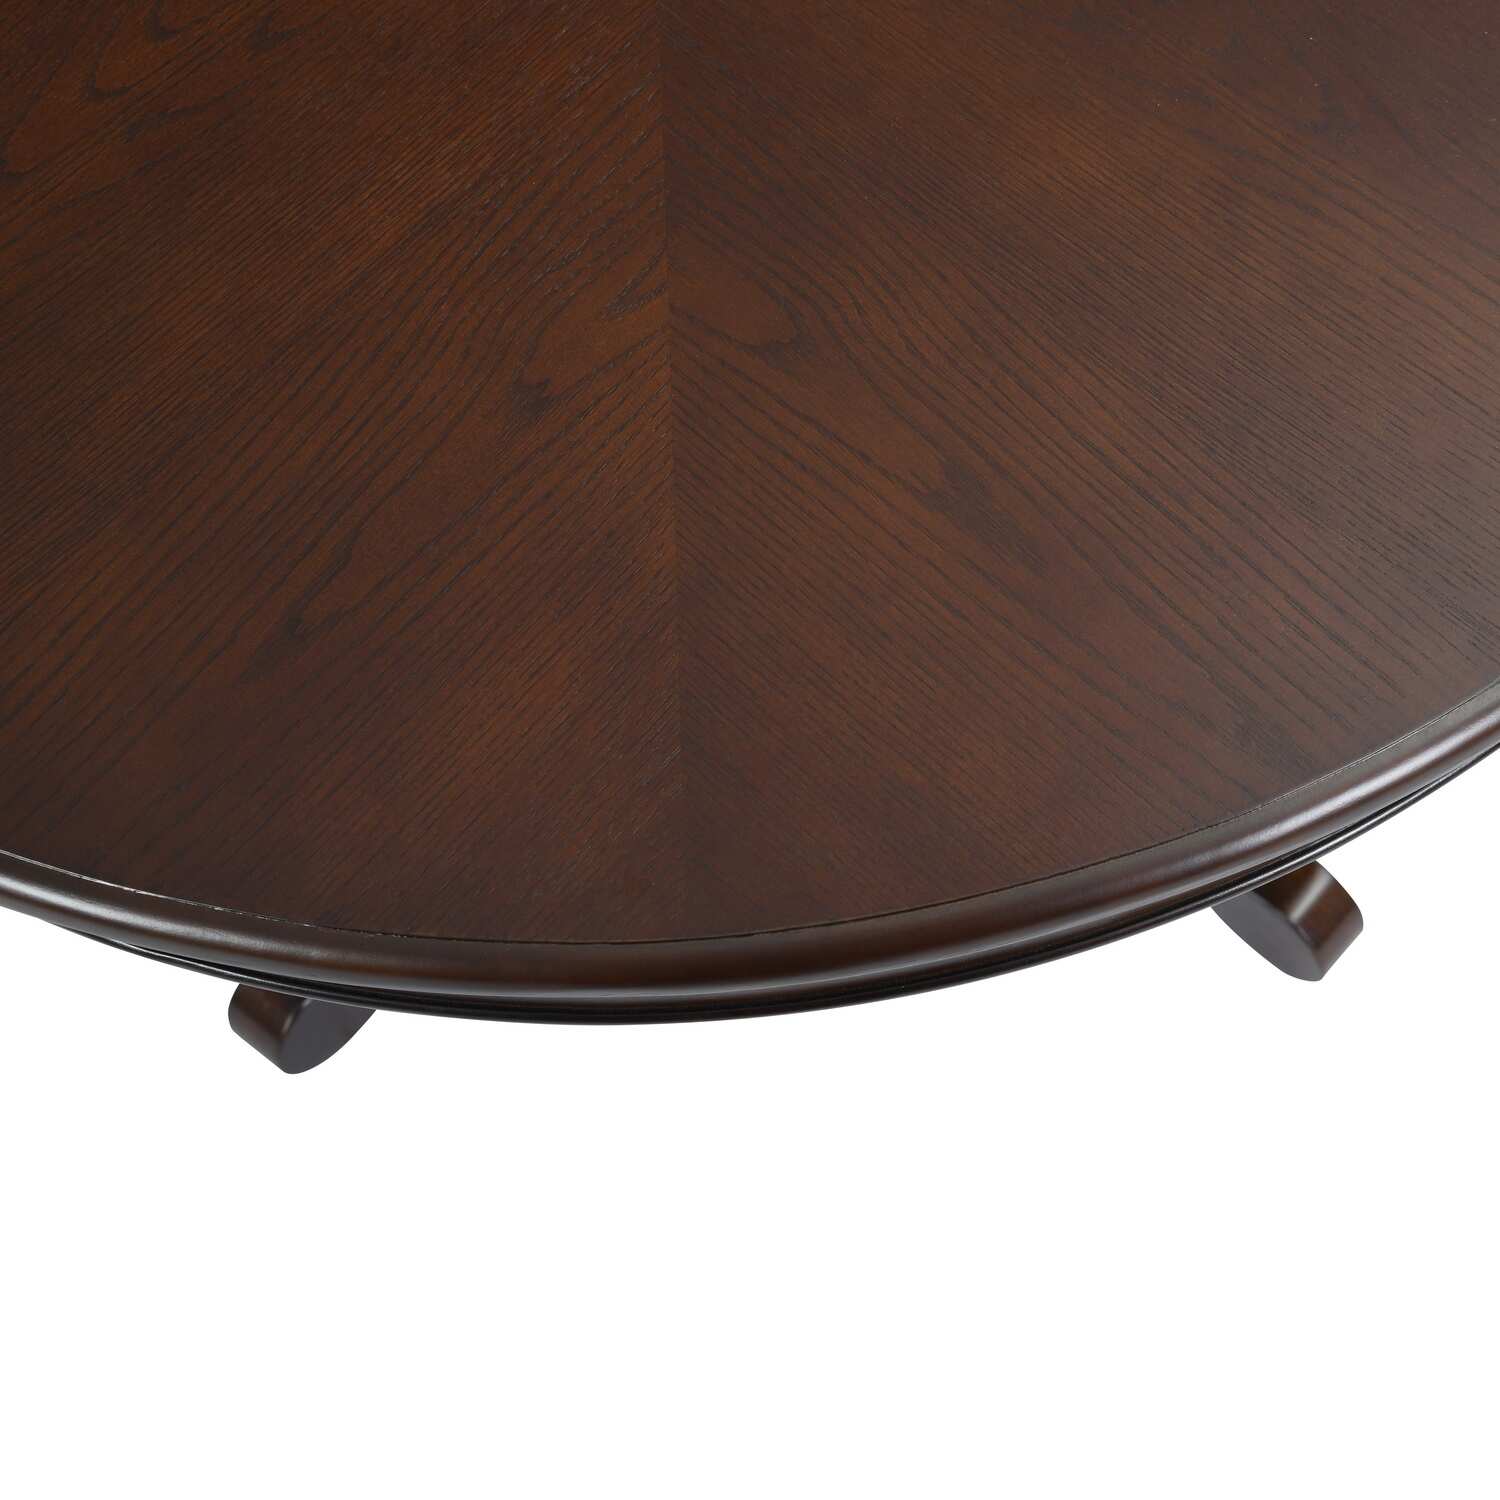 Homylin 41 in. Round Brown Wood Dining Table (Seats 4)